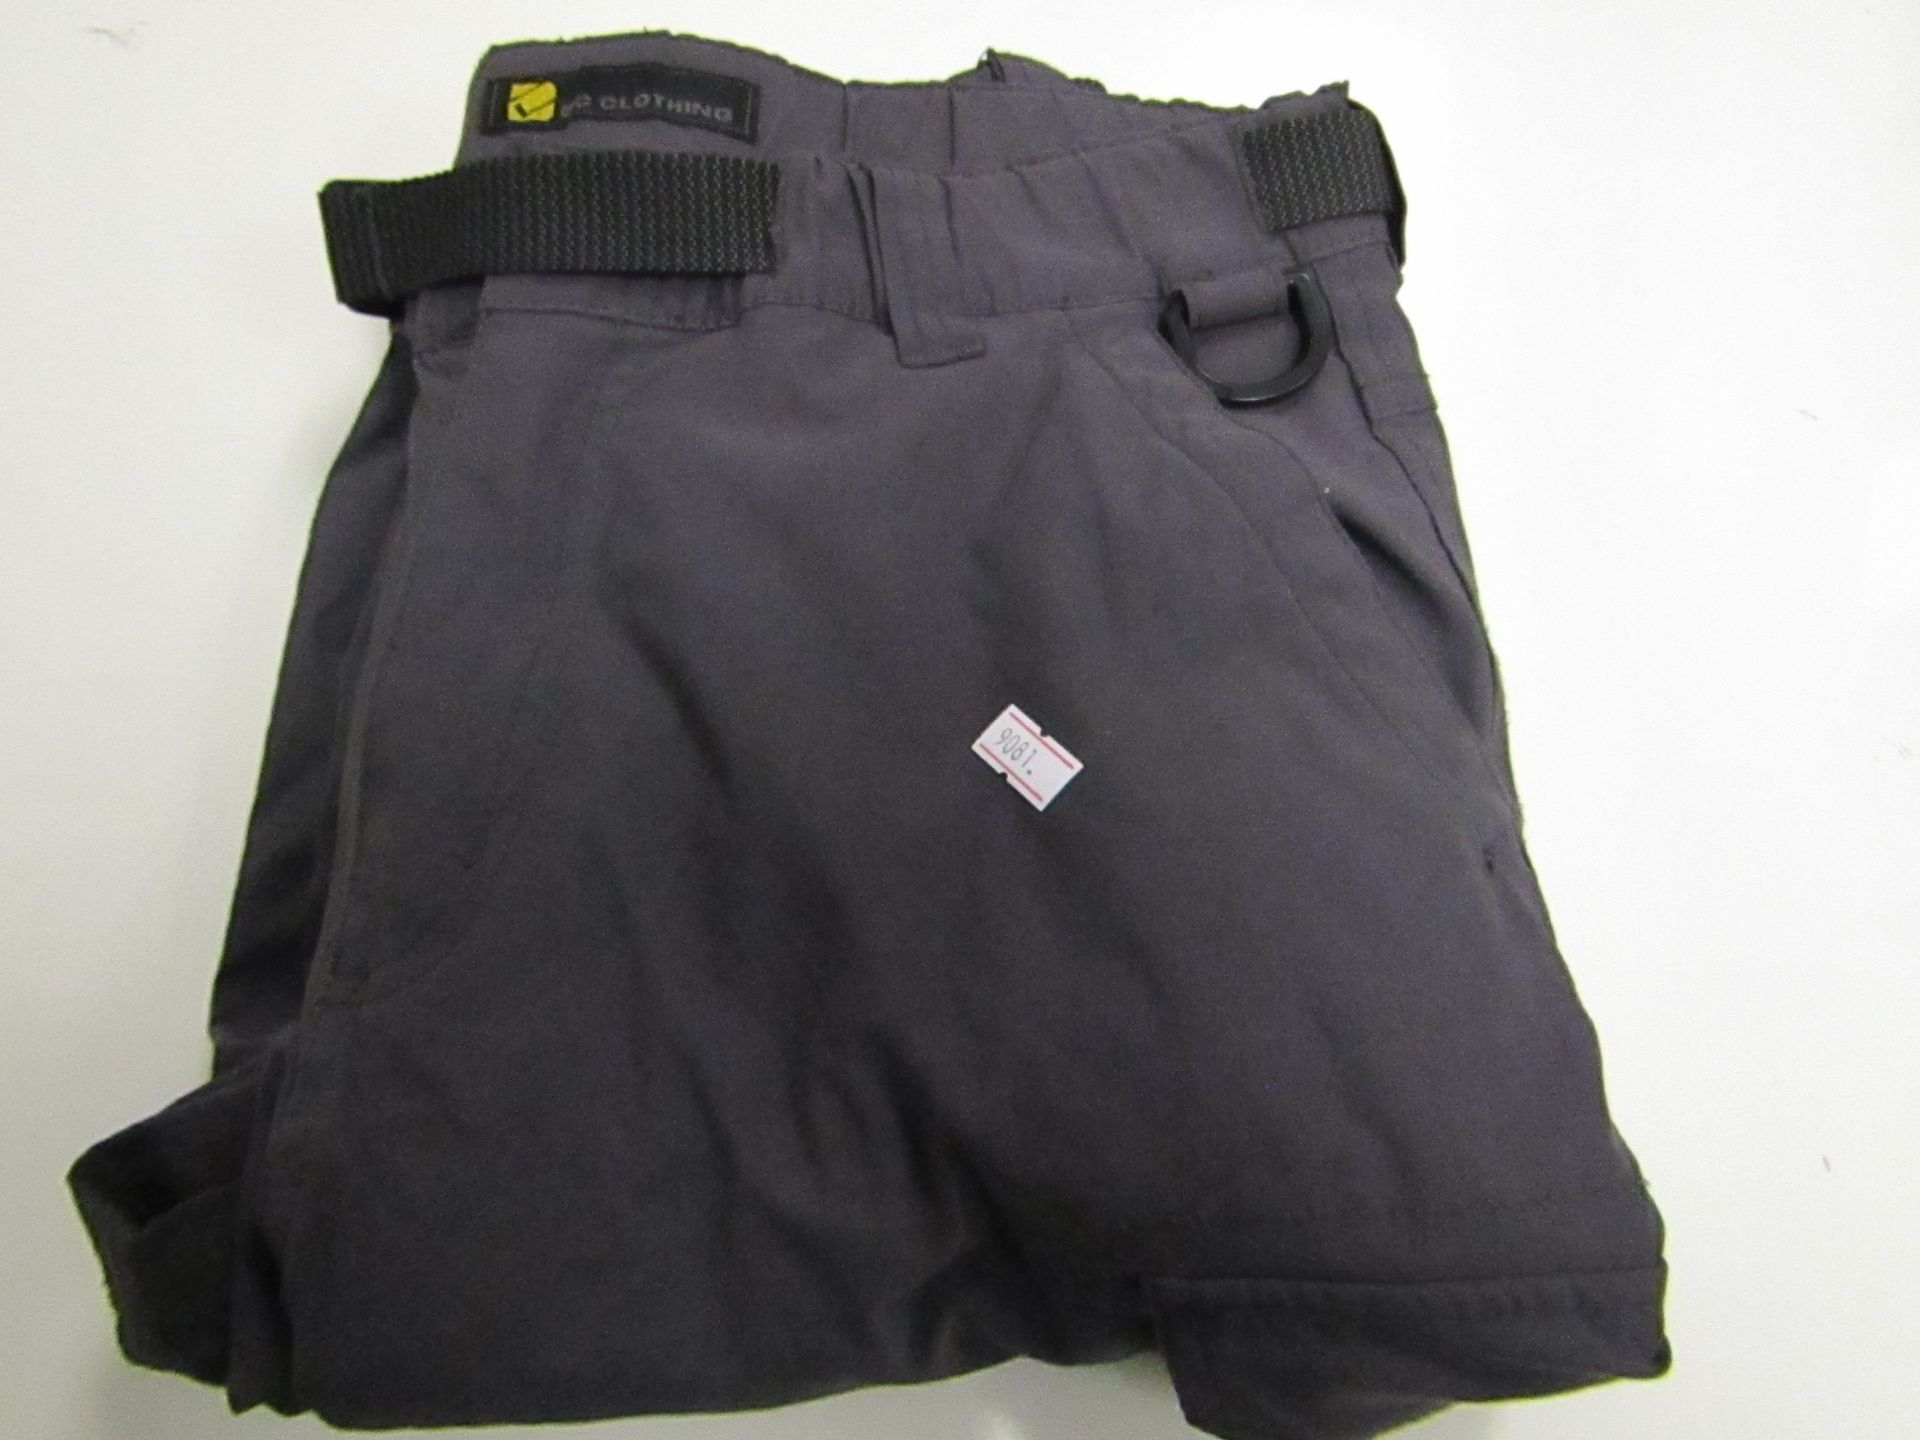 BC Clothing Lined Work Pants W 32" X L 30" Grey Look in Good Condition